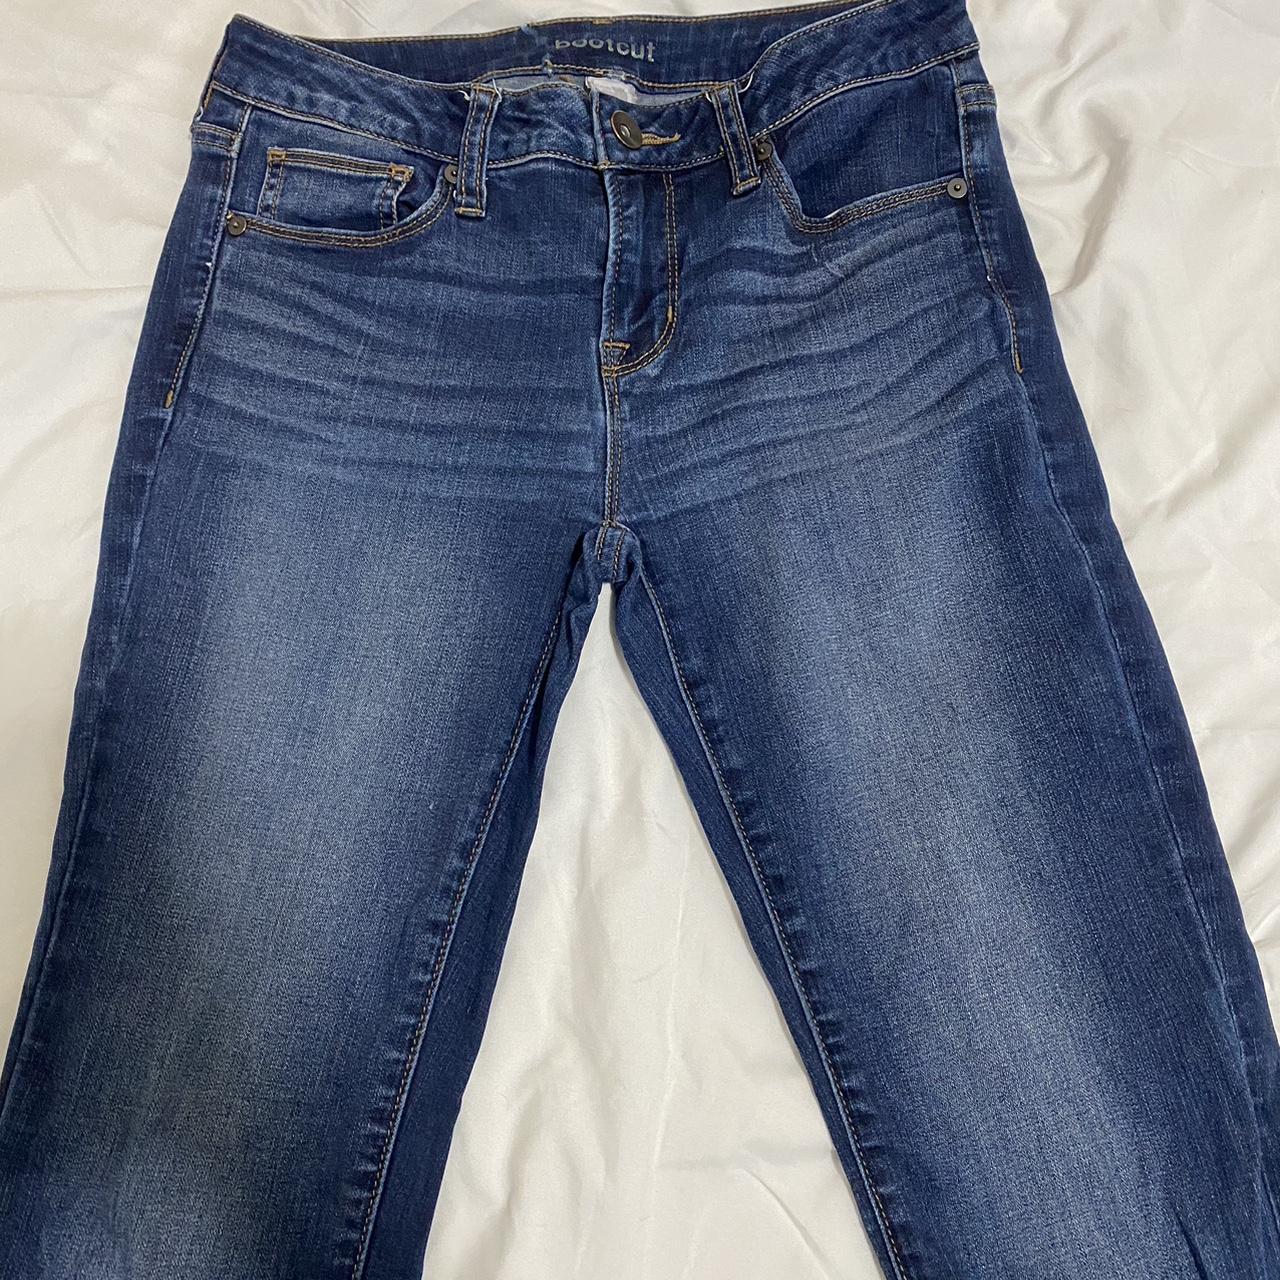 unbranded low rise bootcut jeans - Depop